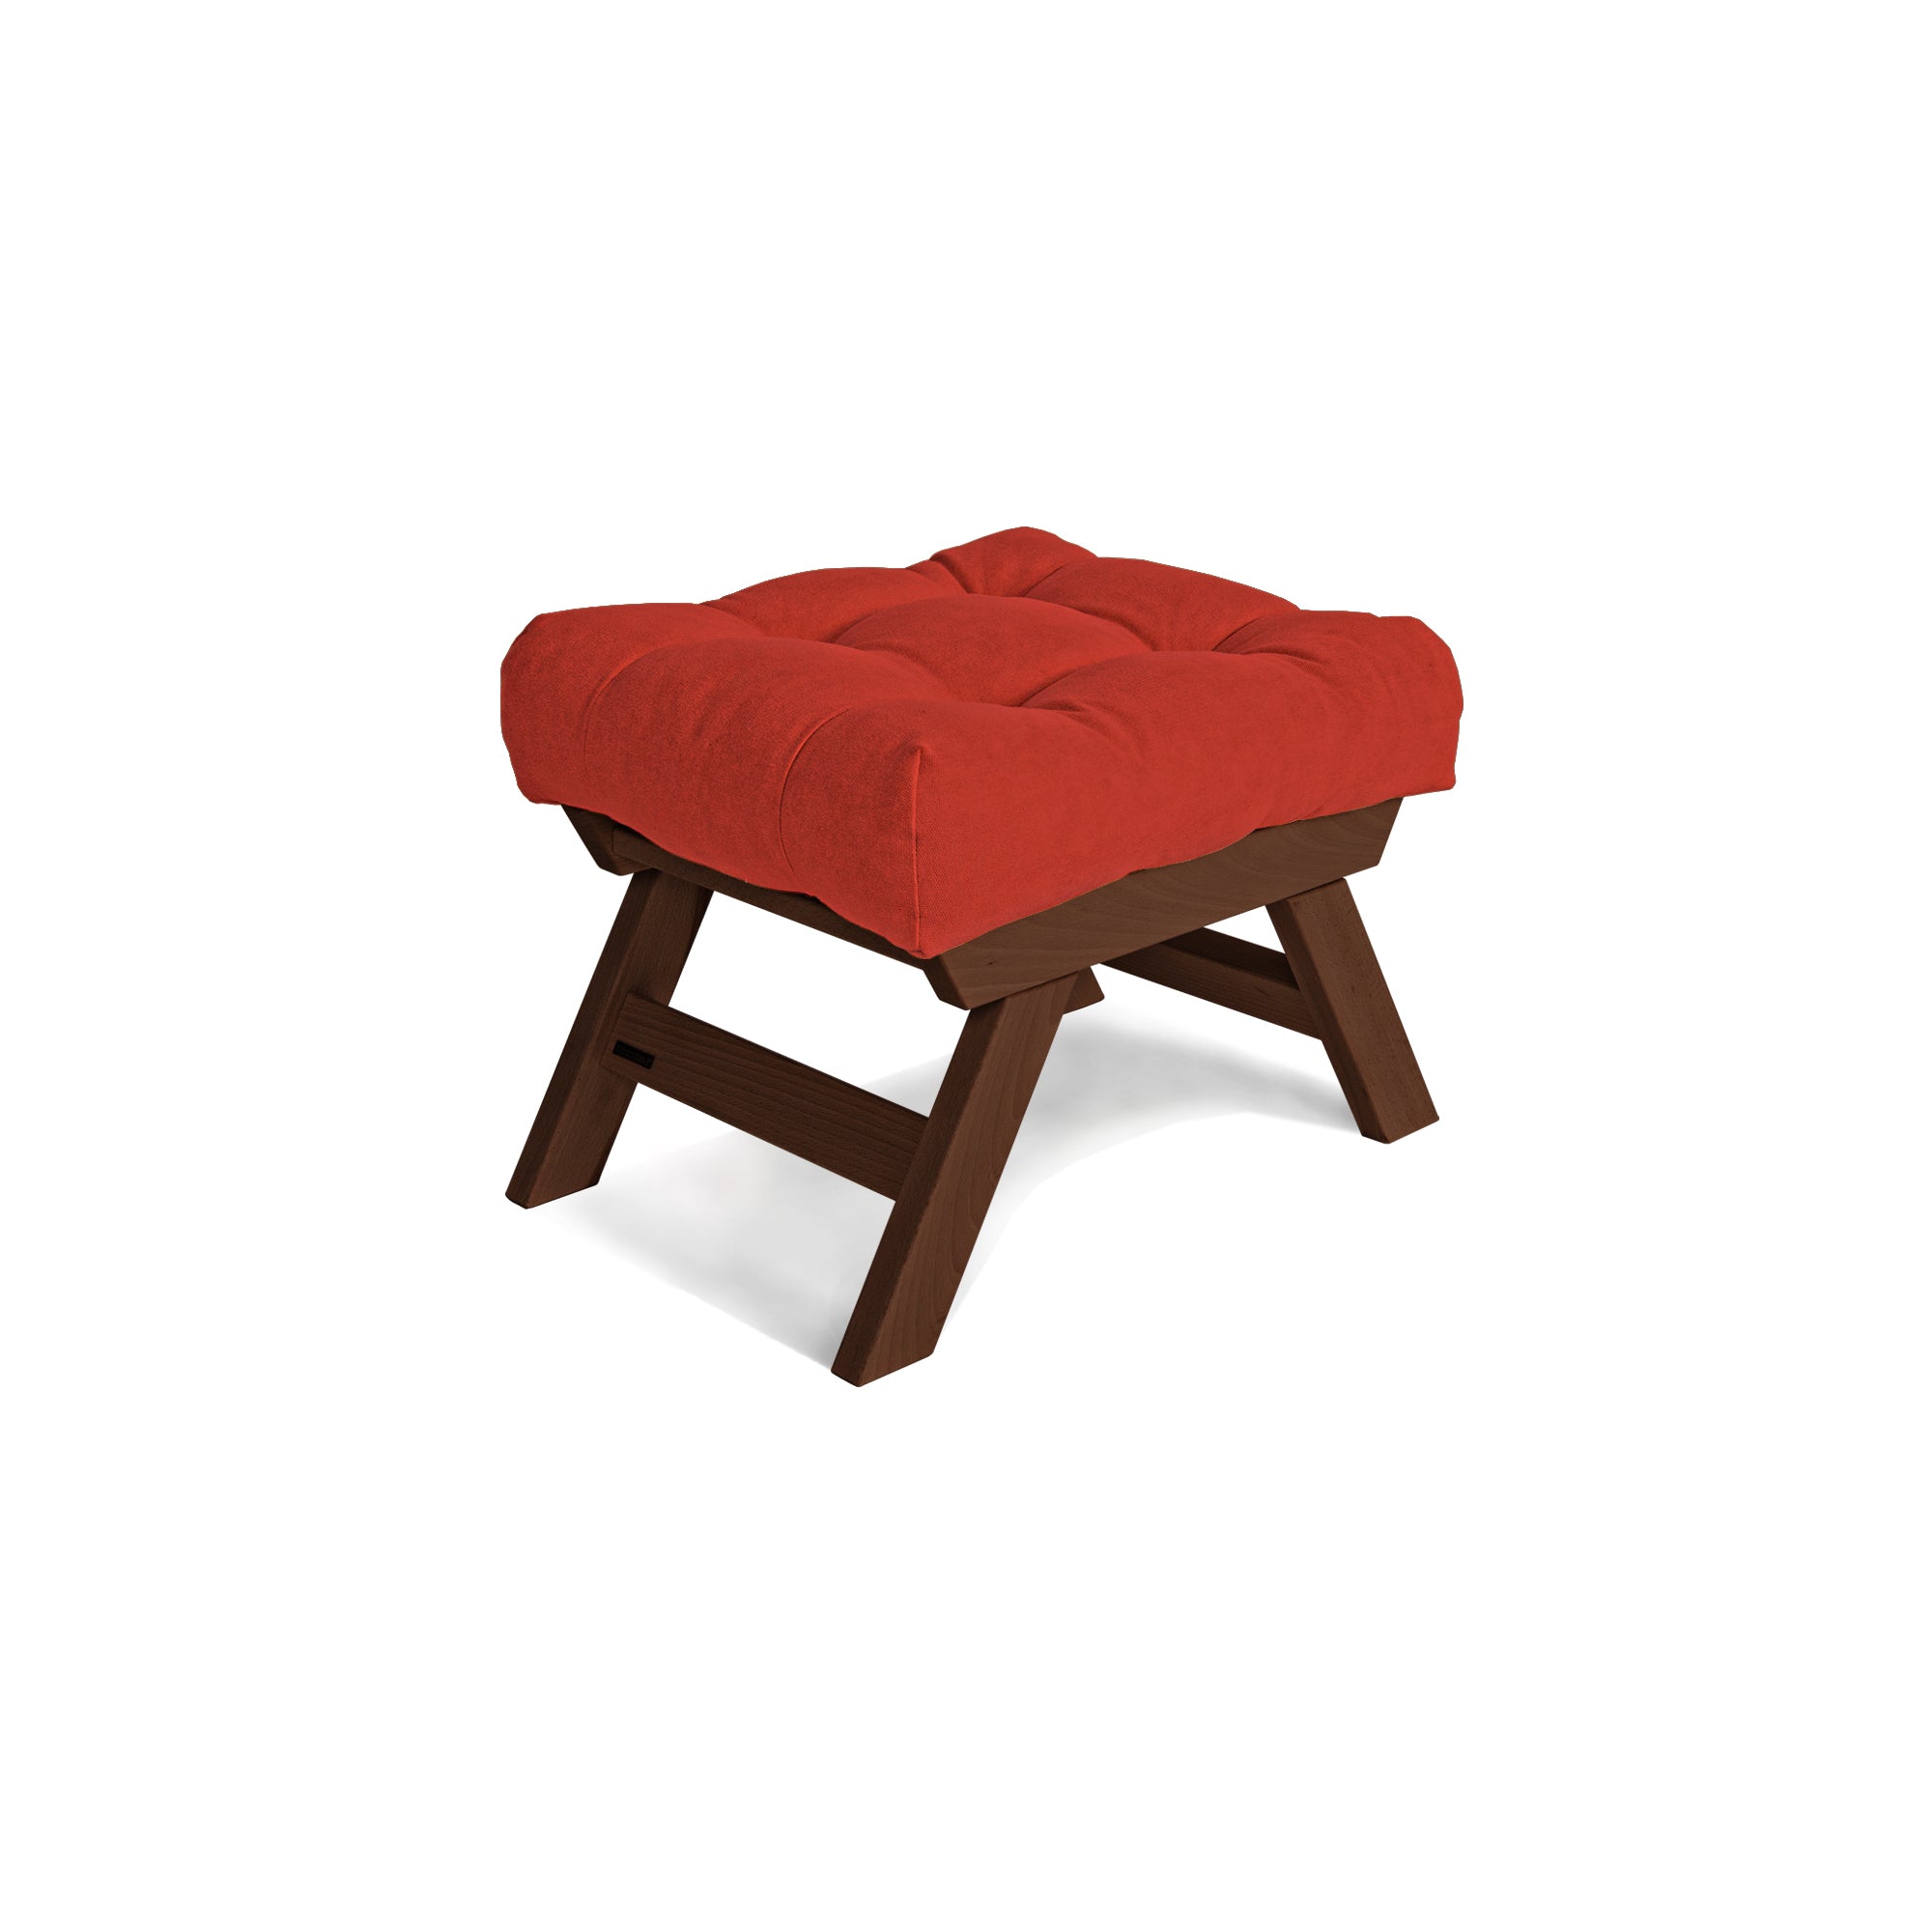 ALLEGRO Pouffe, Walnut Wood upholstery colour red